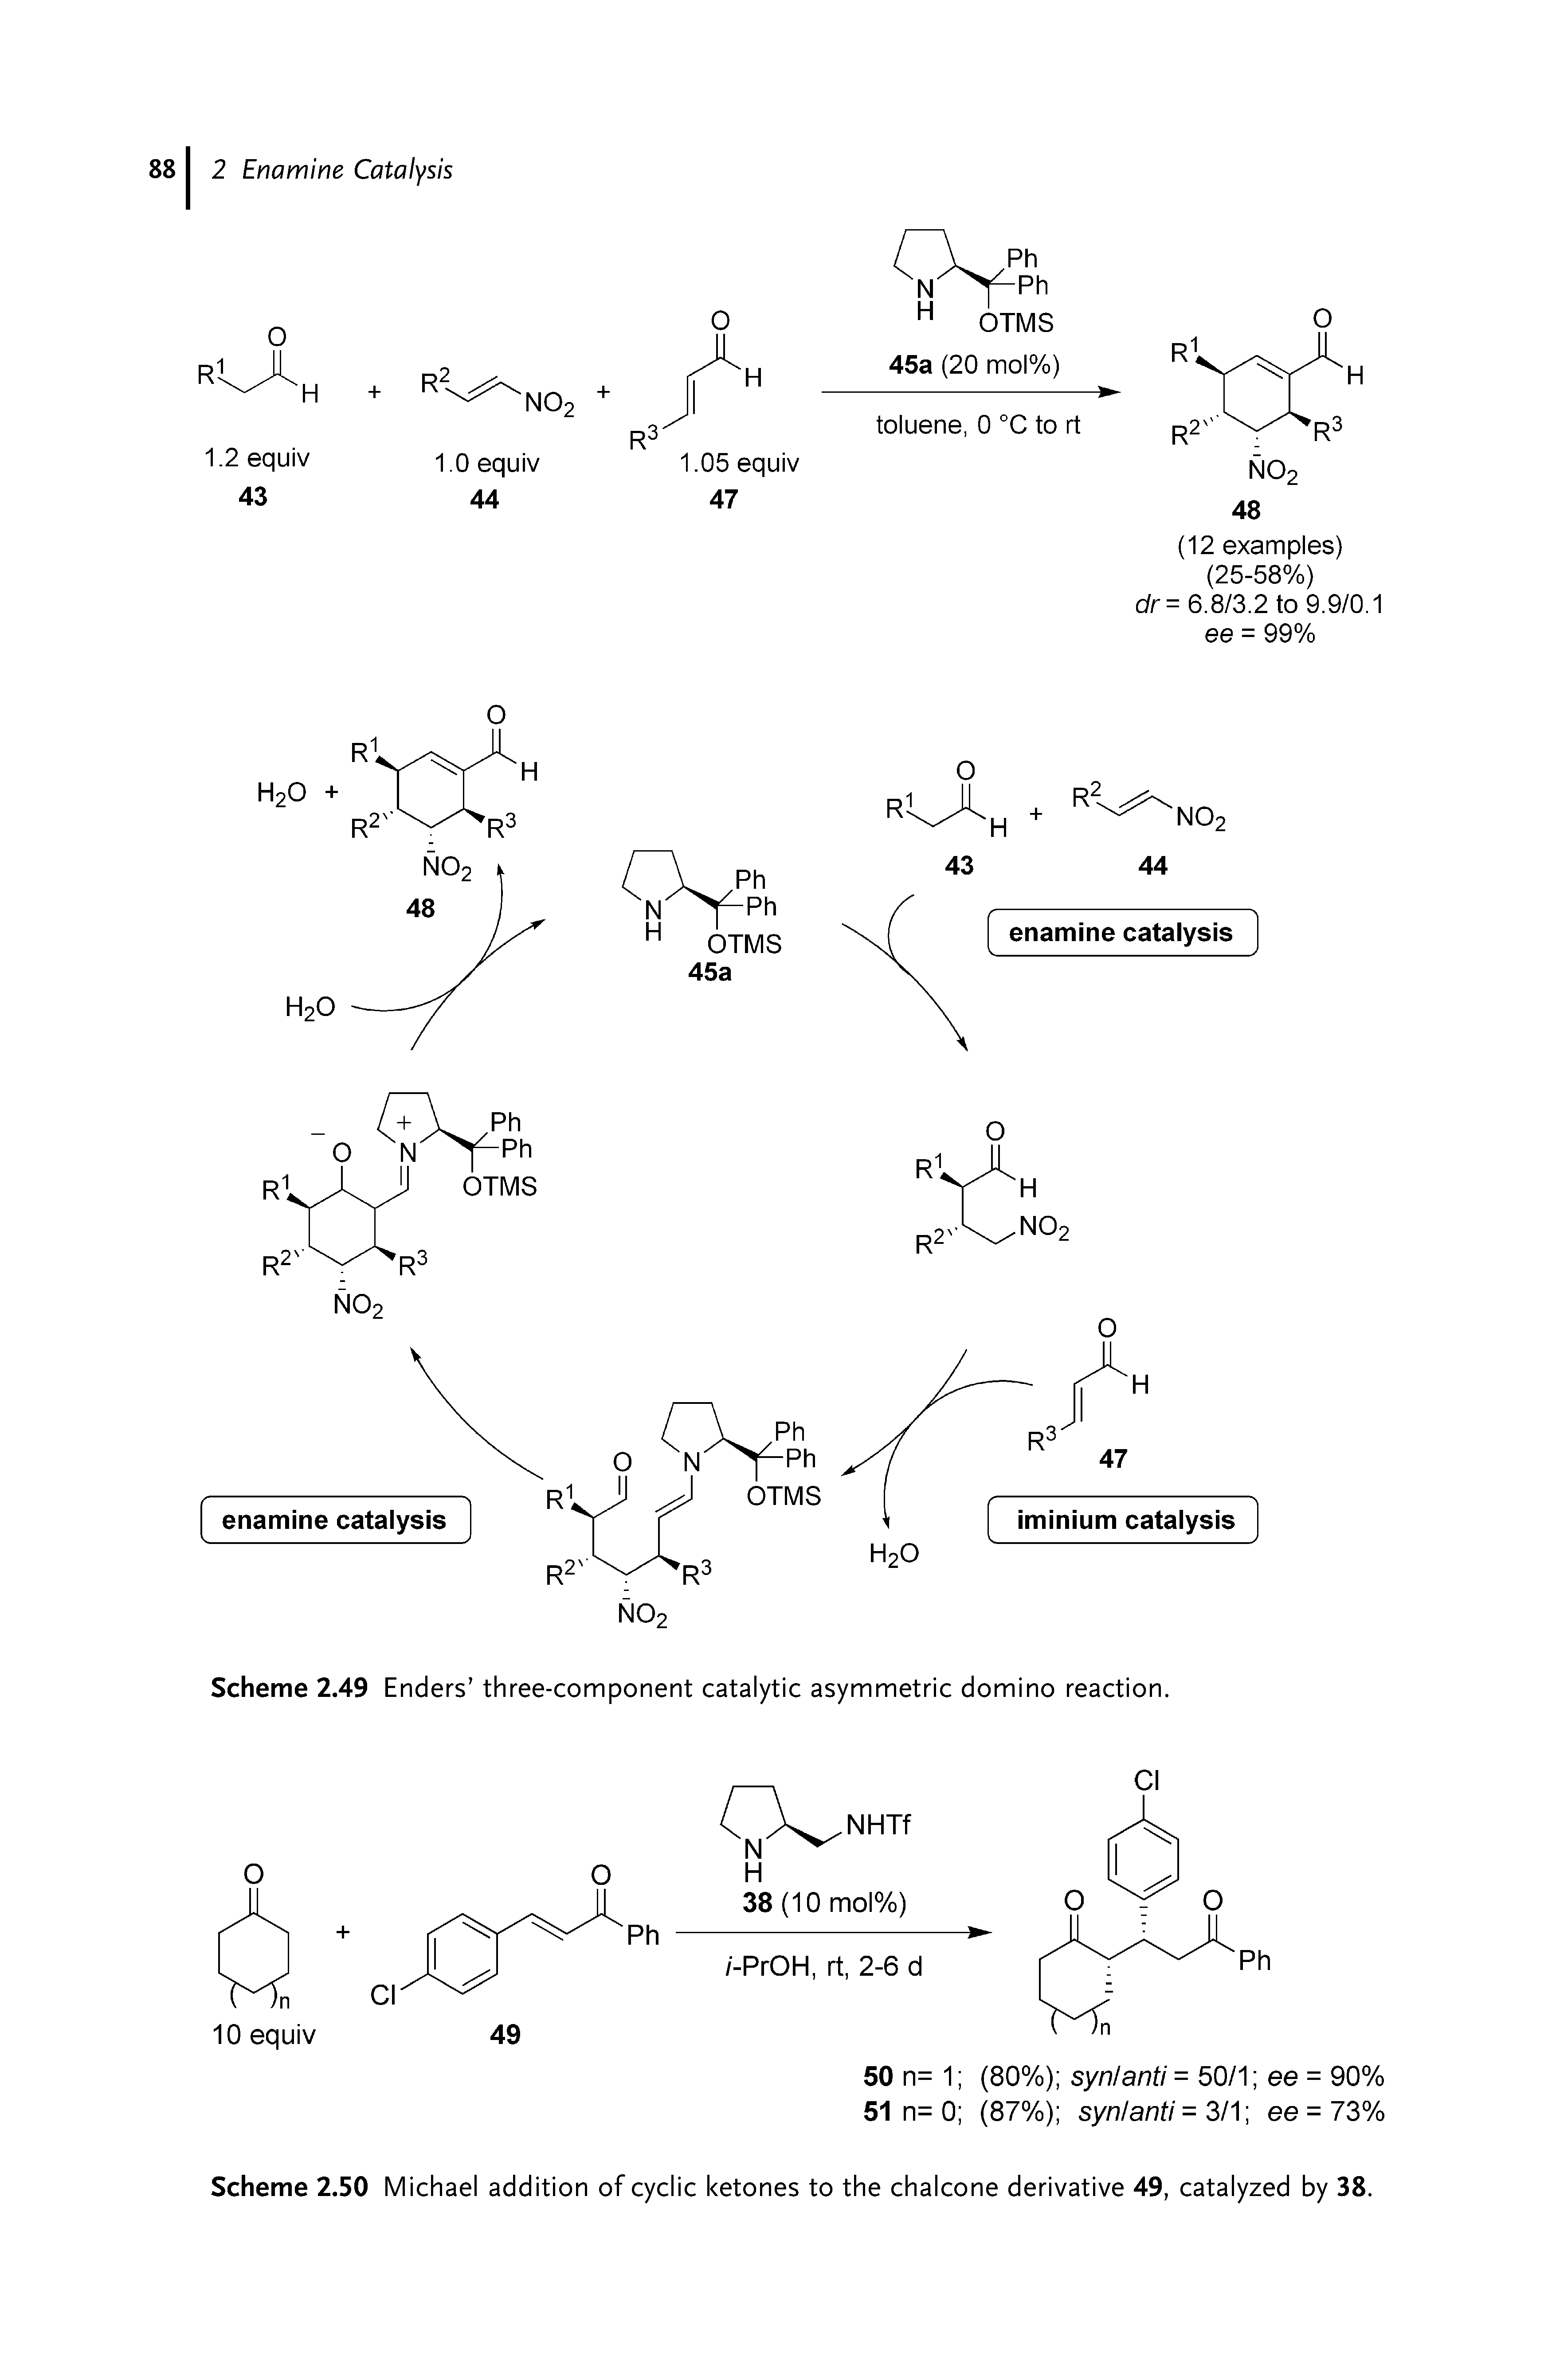 Scheme 2.50 Michael addition of cyclic ketones to the chalcone derivative 49, catalyzed by 38.